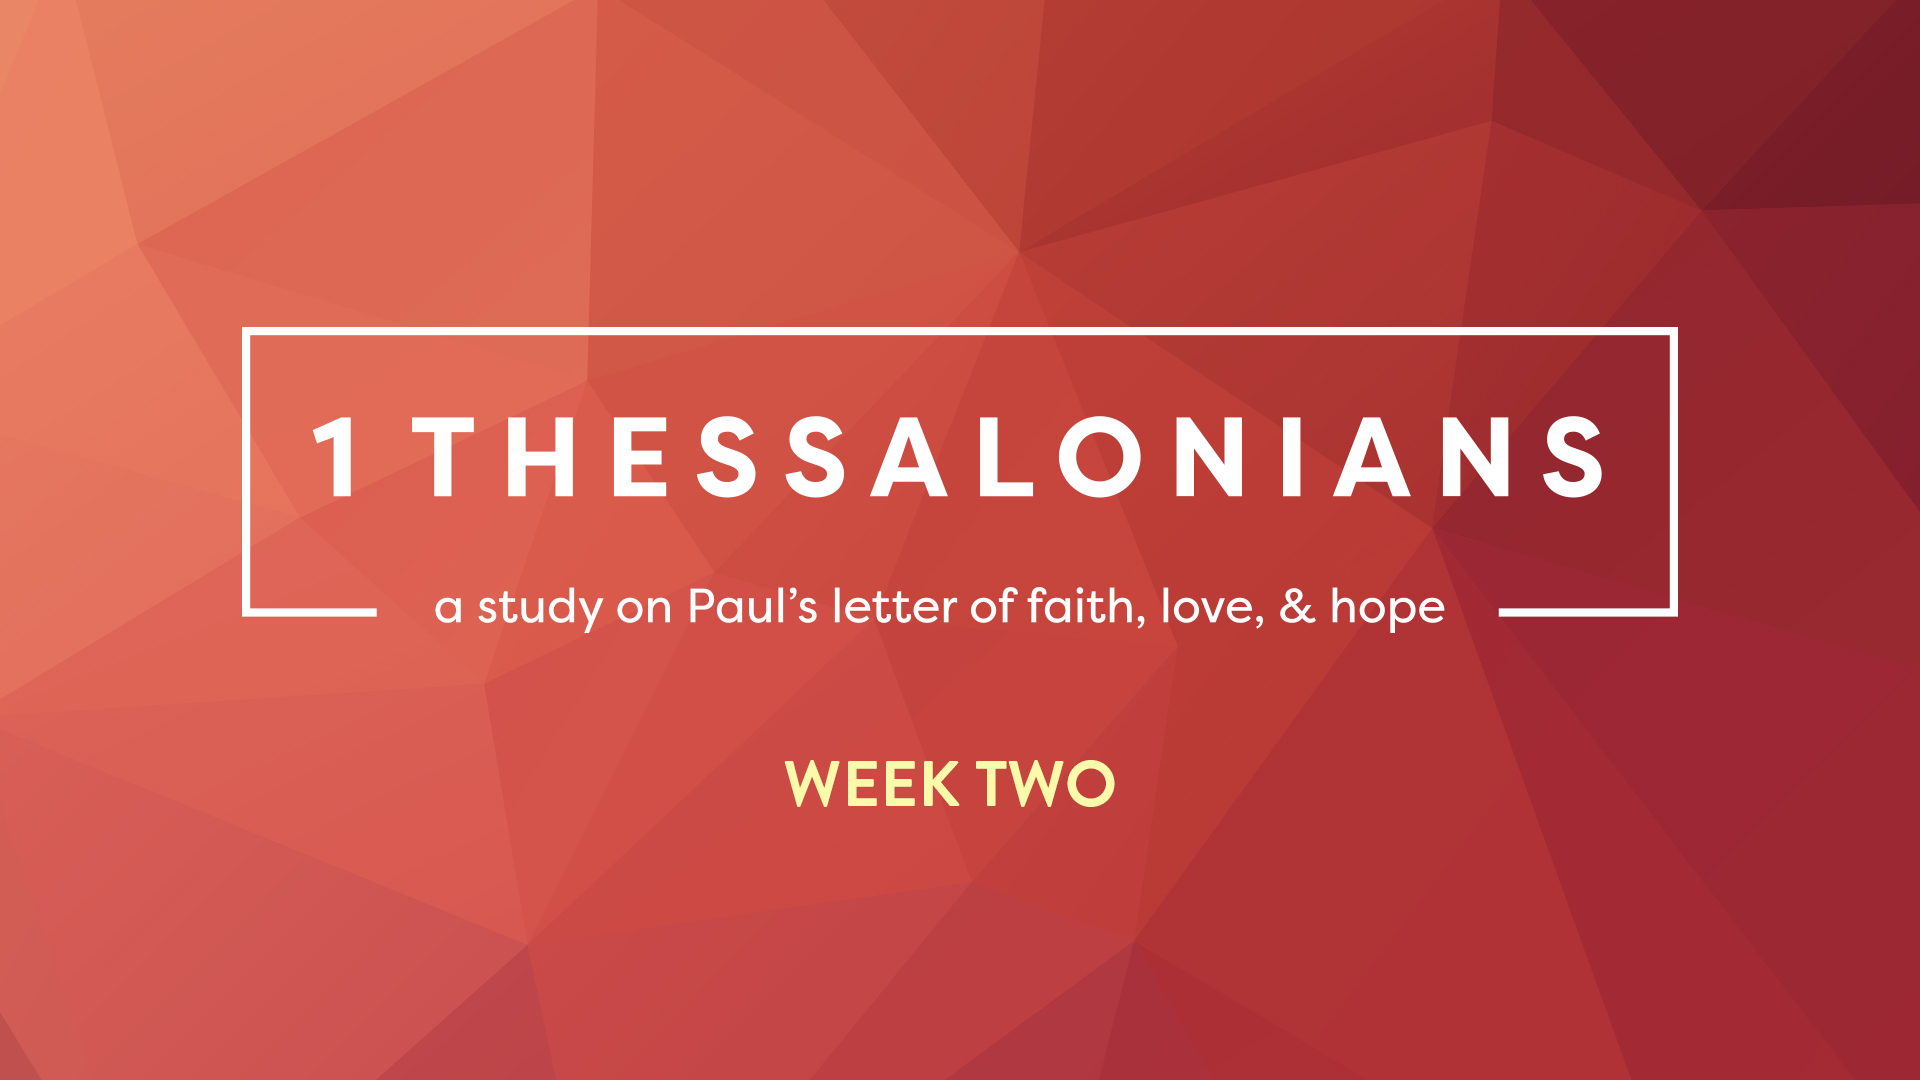 1 Thessalonians: Week Two